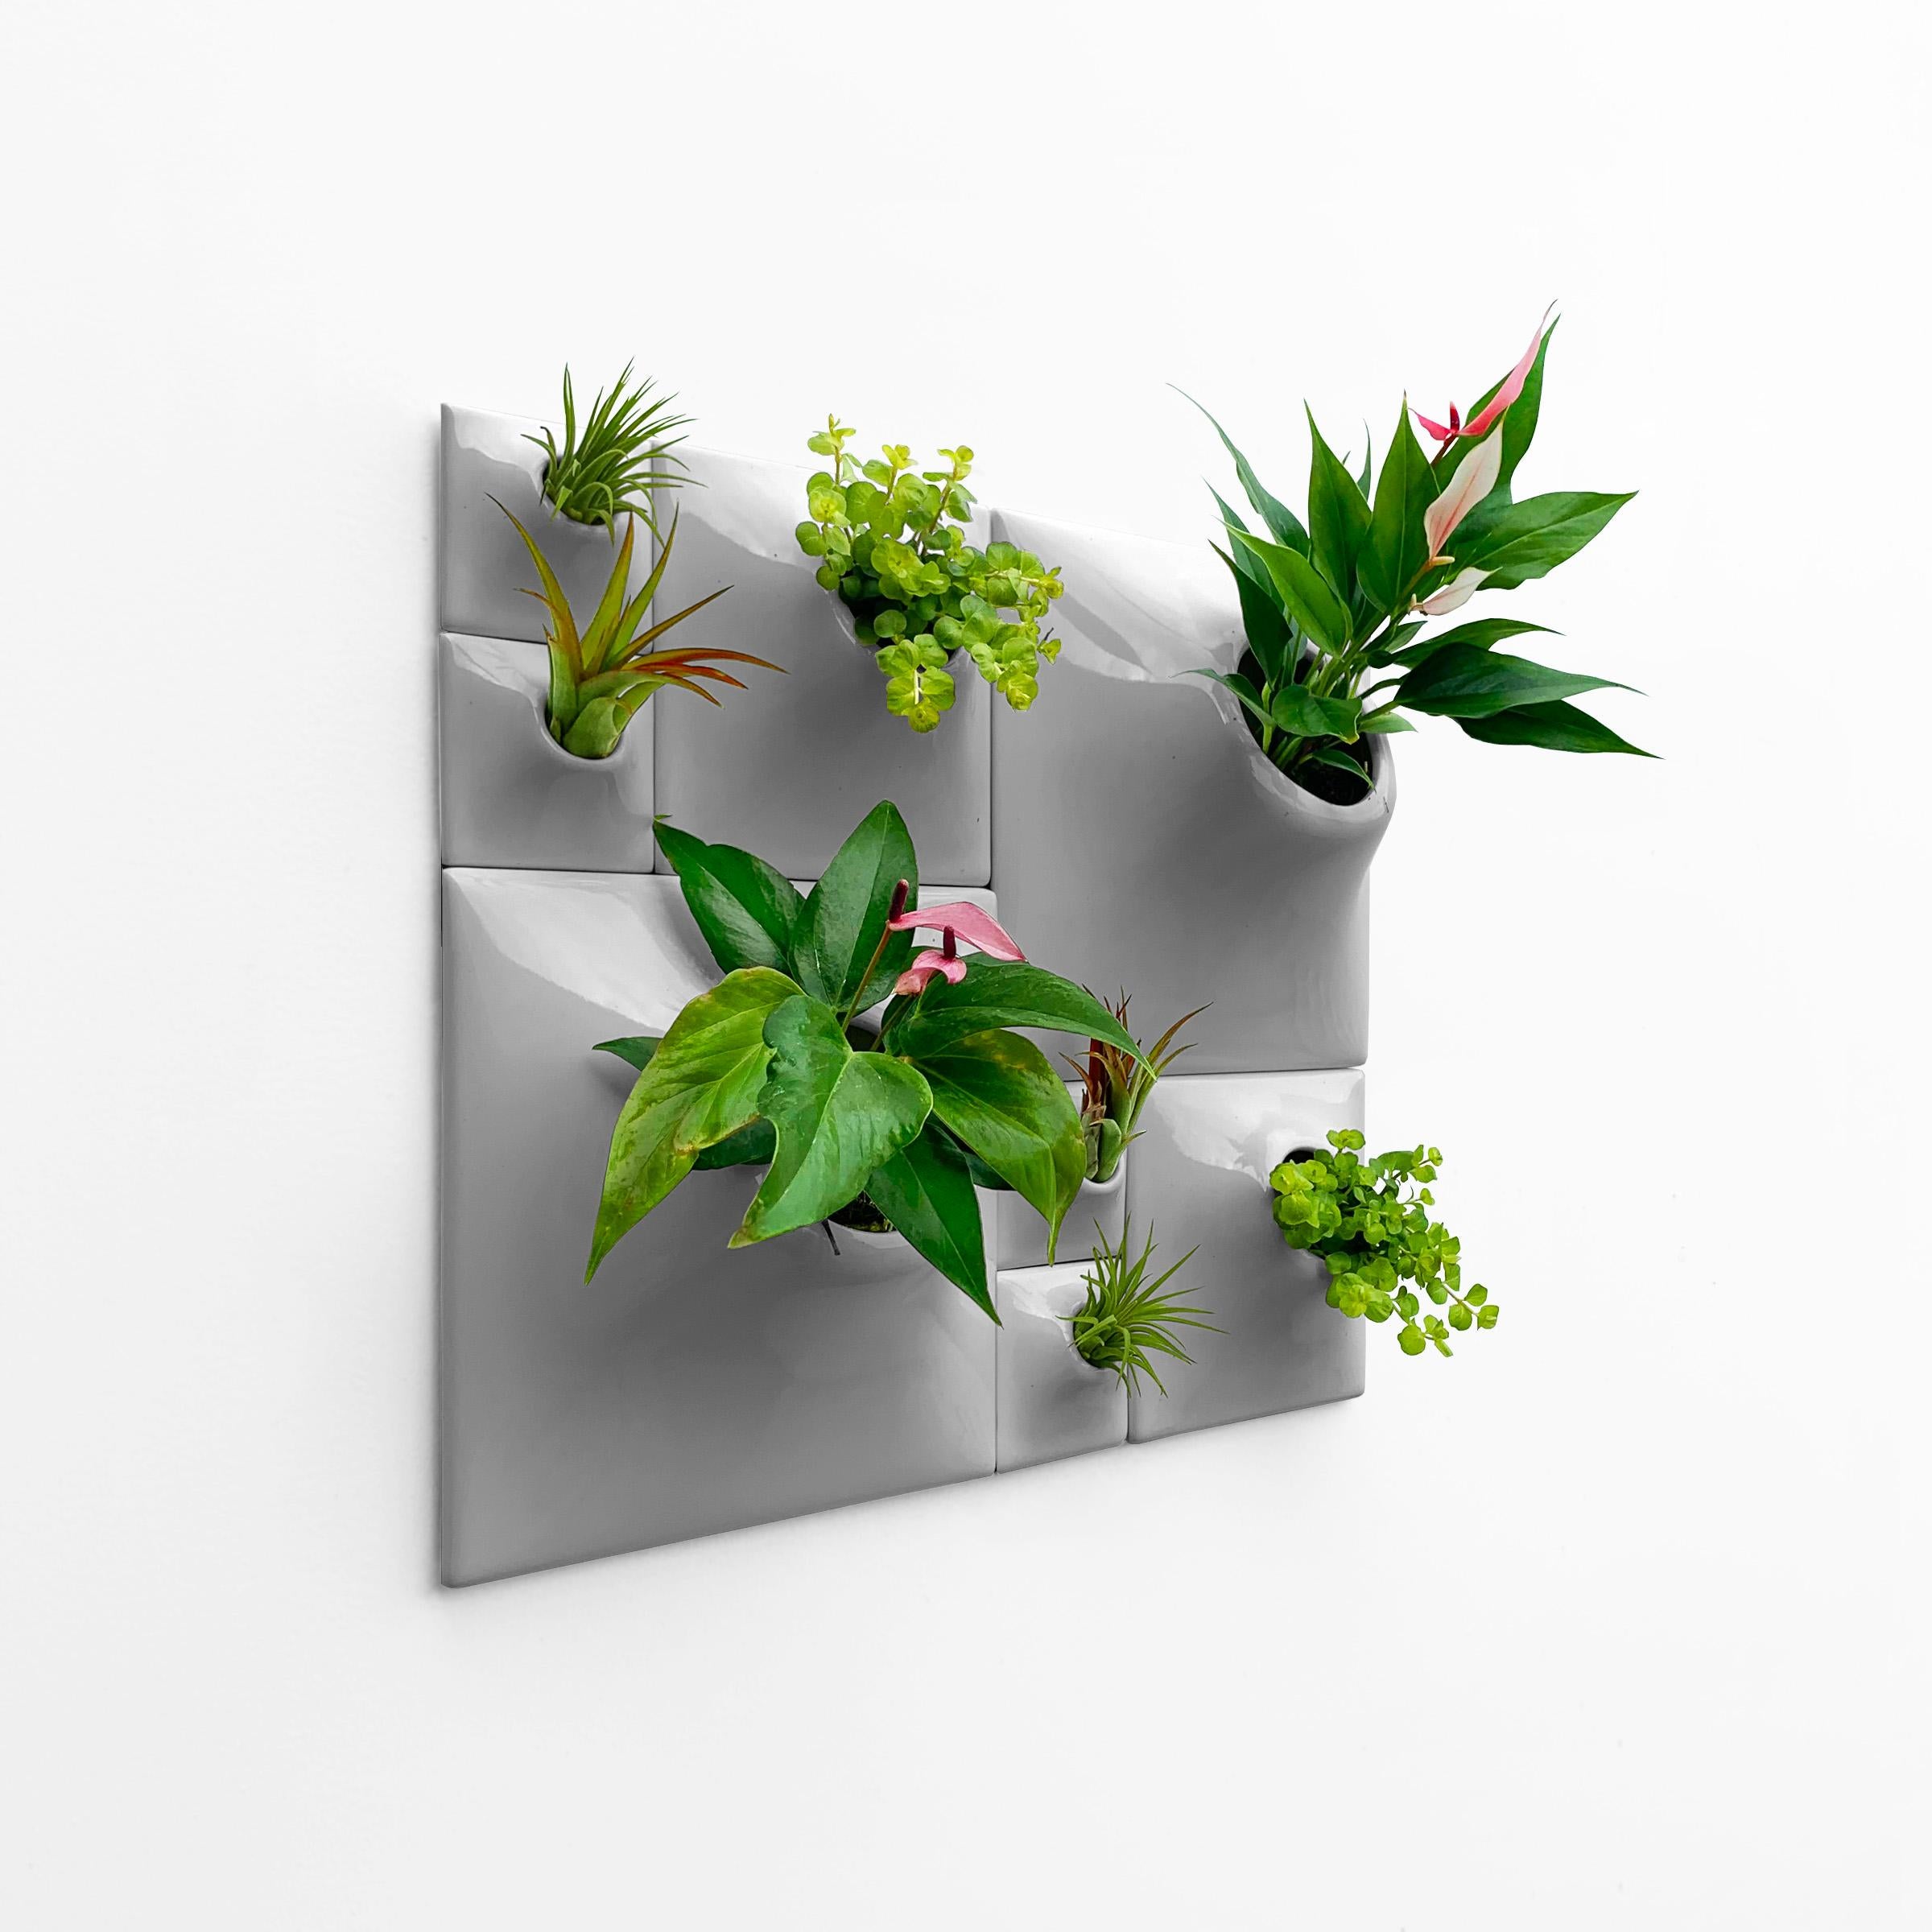 Modern Gray Wall Planter Set, Greenwall Sculpture, Living Wall Decor, Node BS2M

Reimagine your wall art as an awe-inspiring sculptural plant wall or moss wall in your modern home with this breathtaking Node Wall Planter set. Take your eyes on a